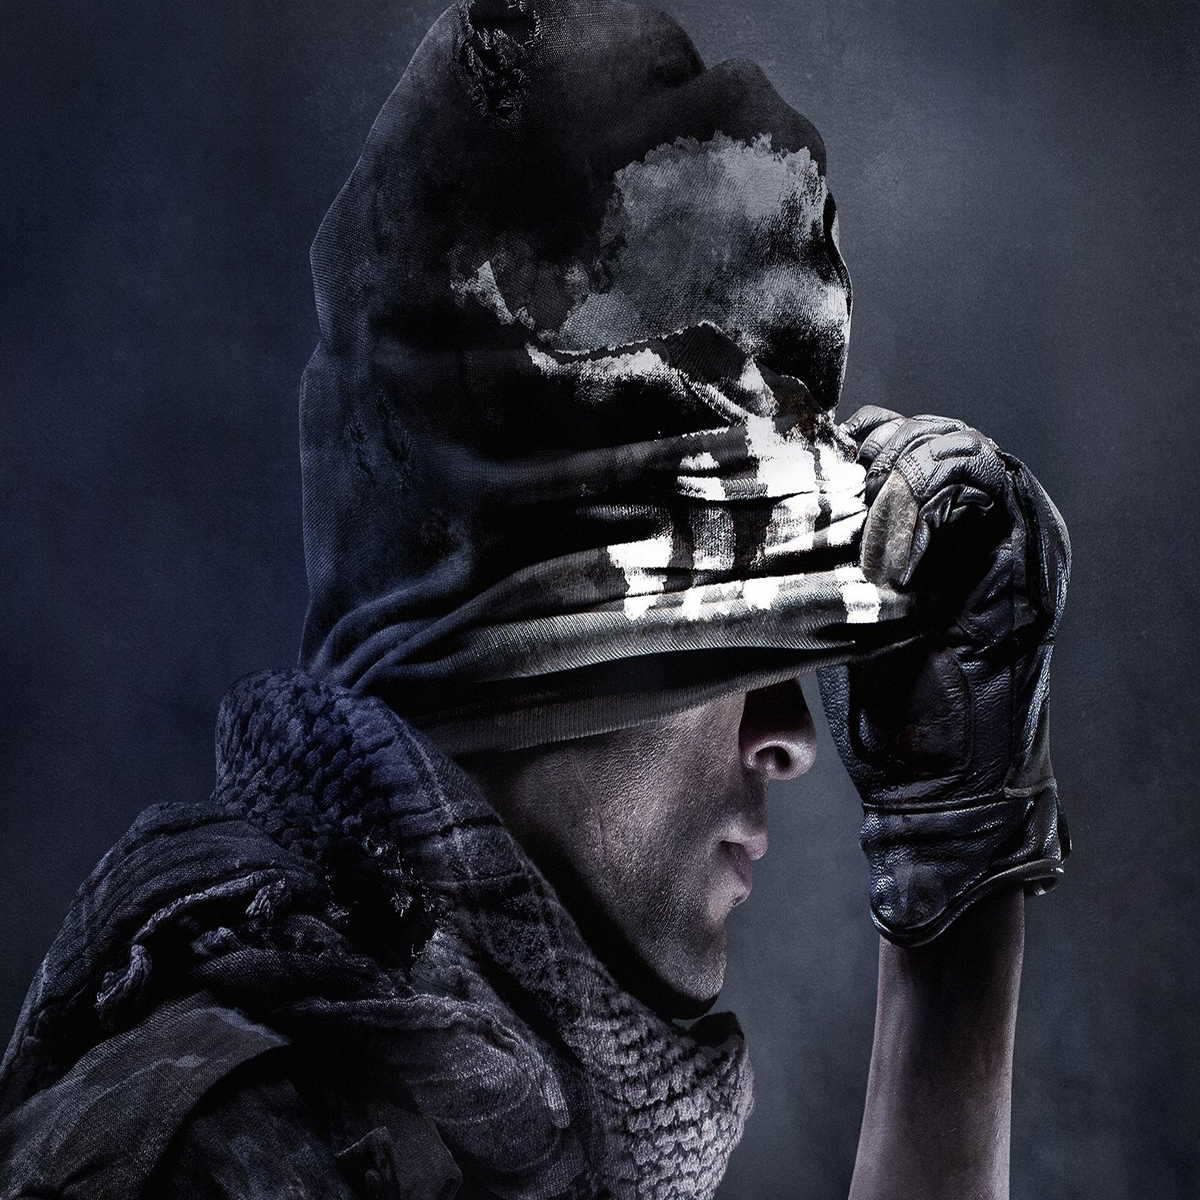 Call Of Duty: Ghosts (PS4) • See best prices today »